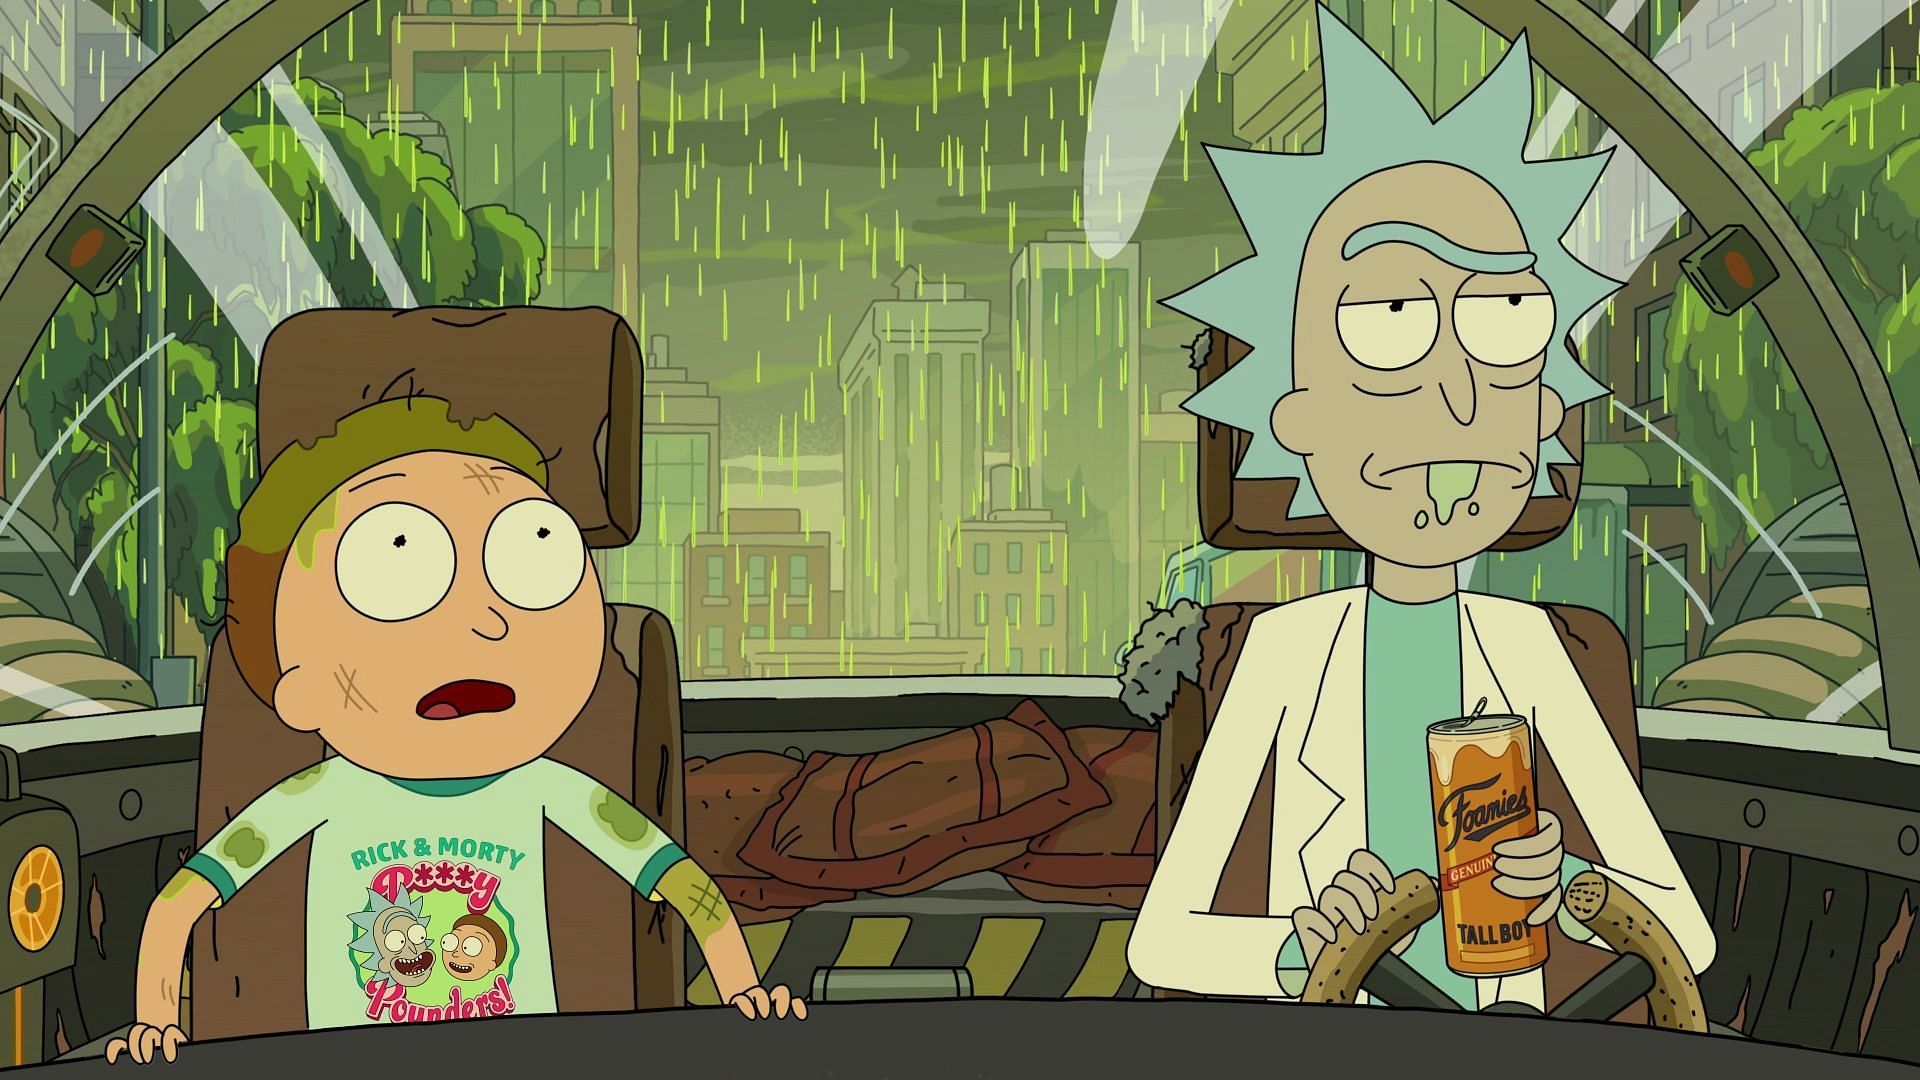 Where to watch Rick and Morty season 6 episode 8?